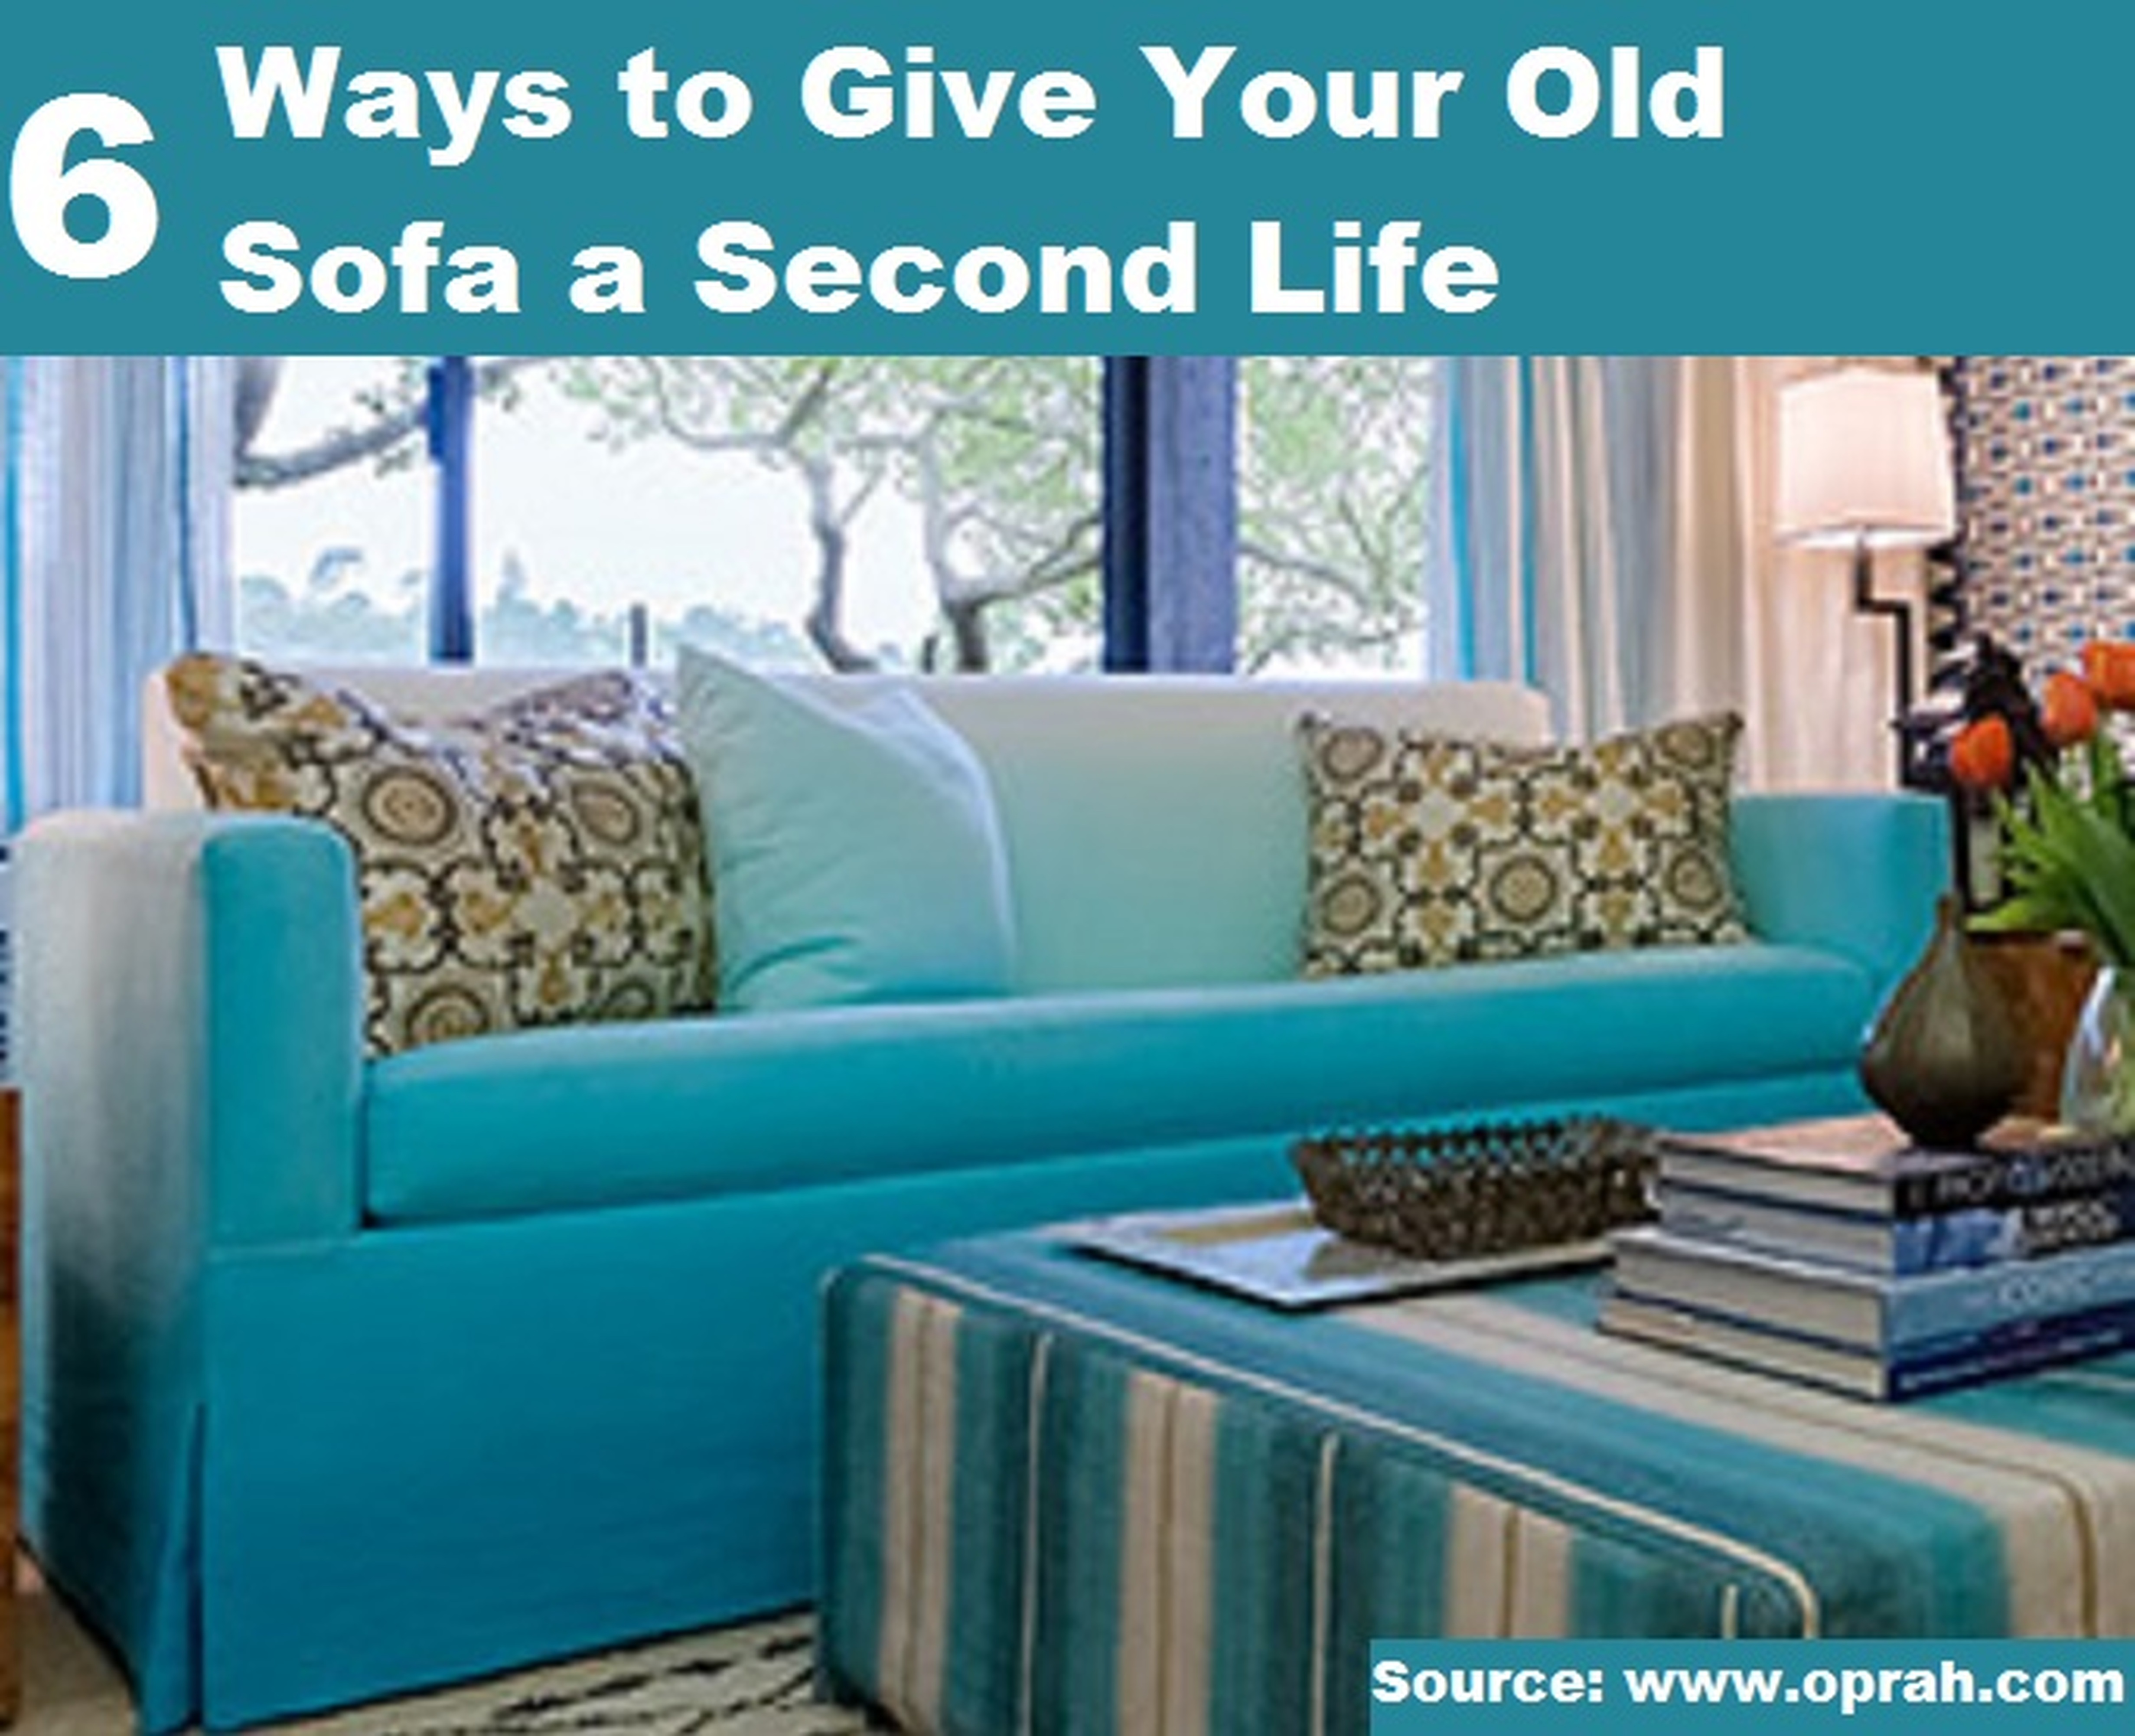 6 Ways to Give Your Old Sofa a Second Life